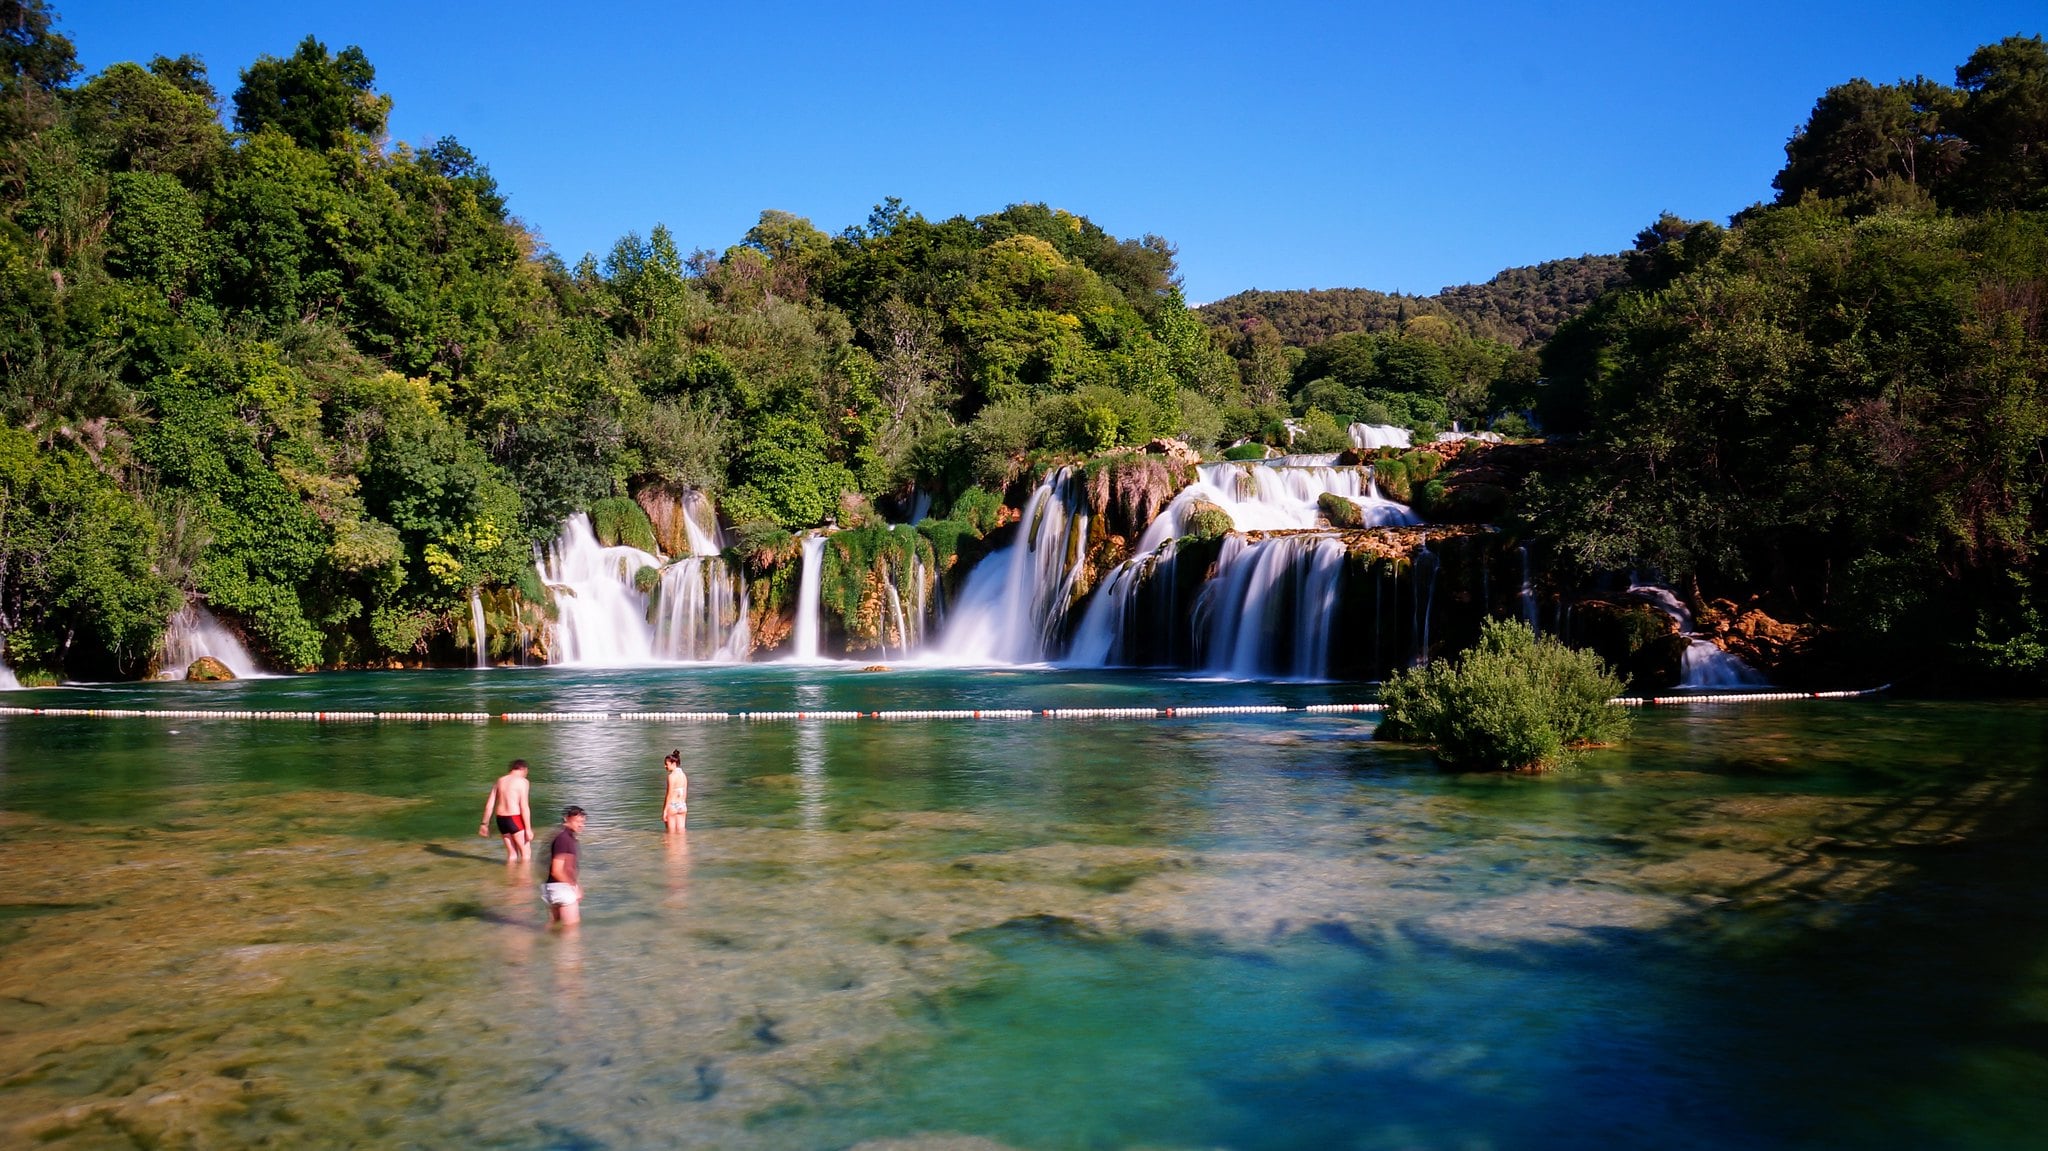 Krka National Park is one of the most beautiful places to visit in Croatia